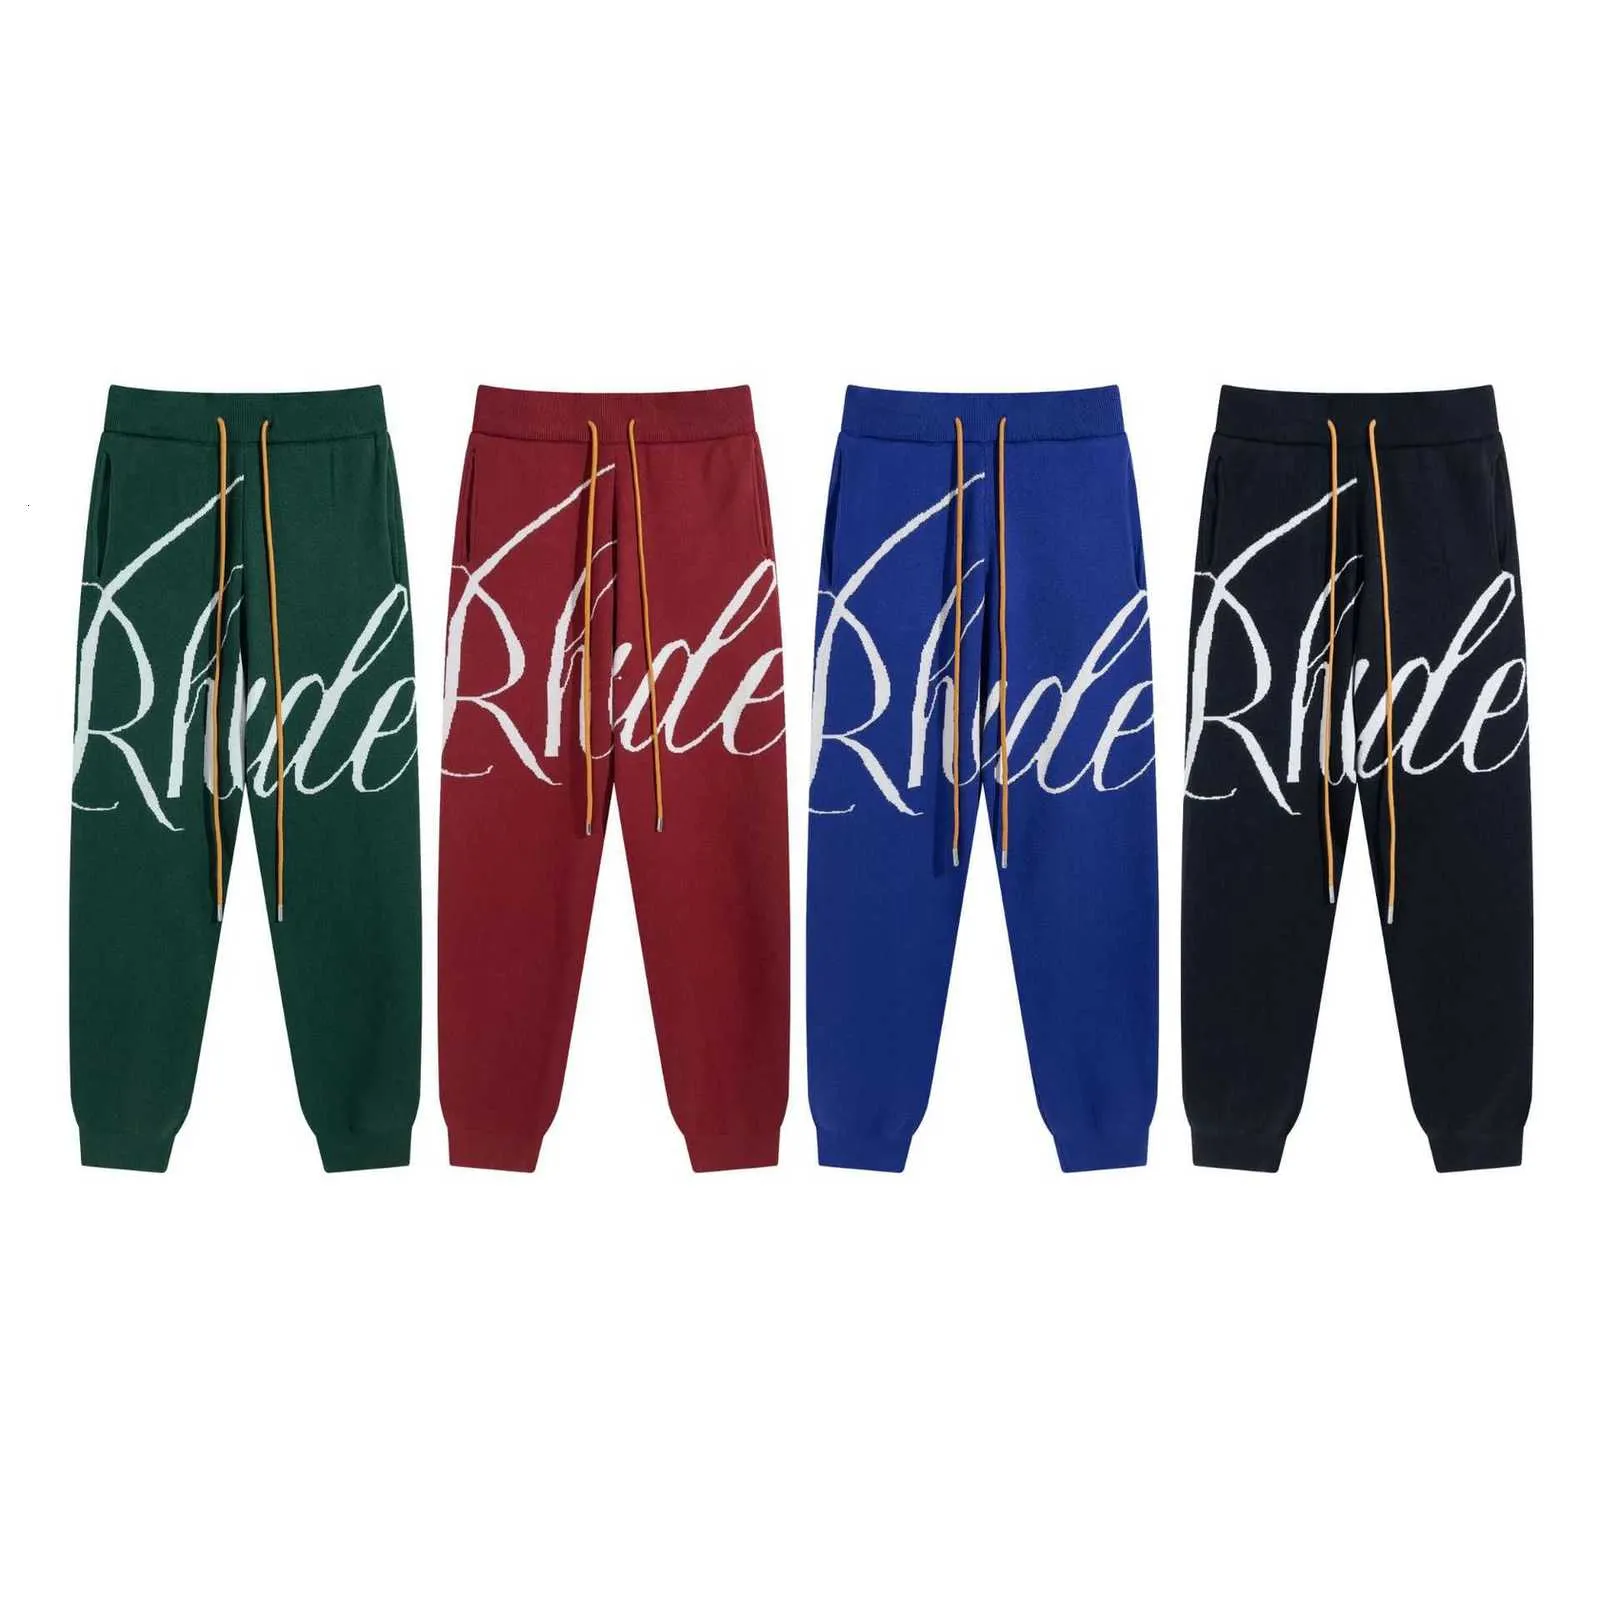 Fashion American Brand Rhude Tricot Floral Lettres Hip-Hop High Street Loose Pantalon For Men and Women